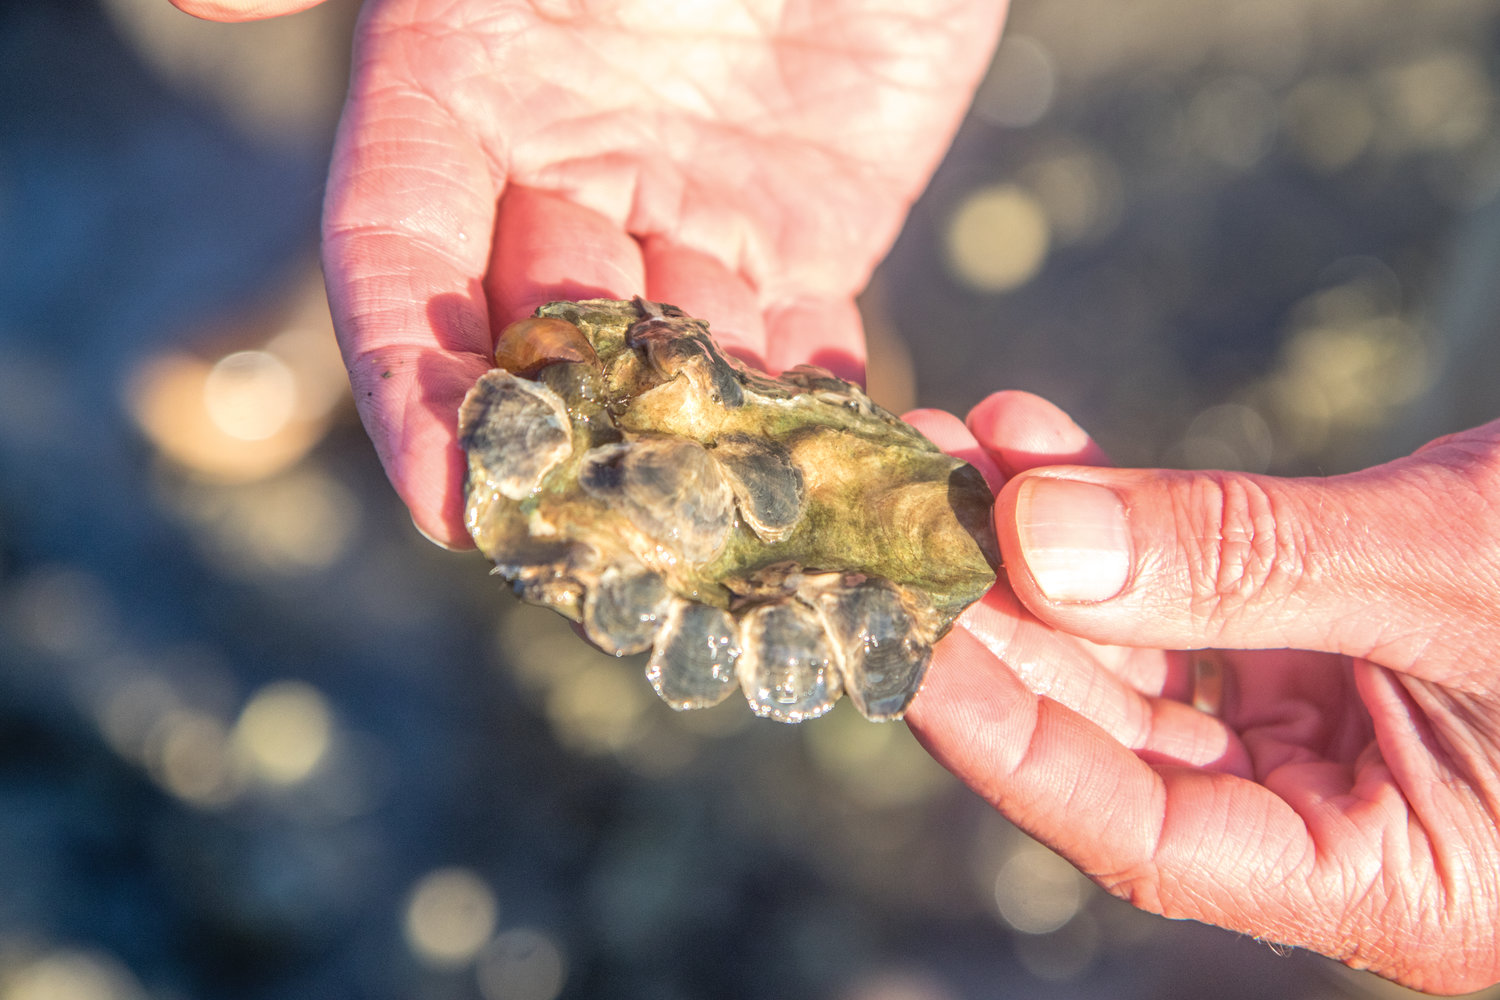 This oyster shell shows several Olympia oysters growing on it. After breeding, female Olympia oysters send out a planktonic larvae into the water. That larvae can stay alive for five to seven days before it either finds a surface, such as a shell, to cling onto and grow, or it dies. The purpose of spreading shell in the water is to provide a higher chance for the oysters to survive.